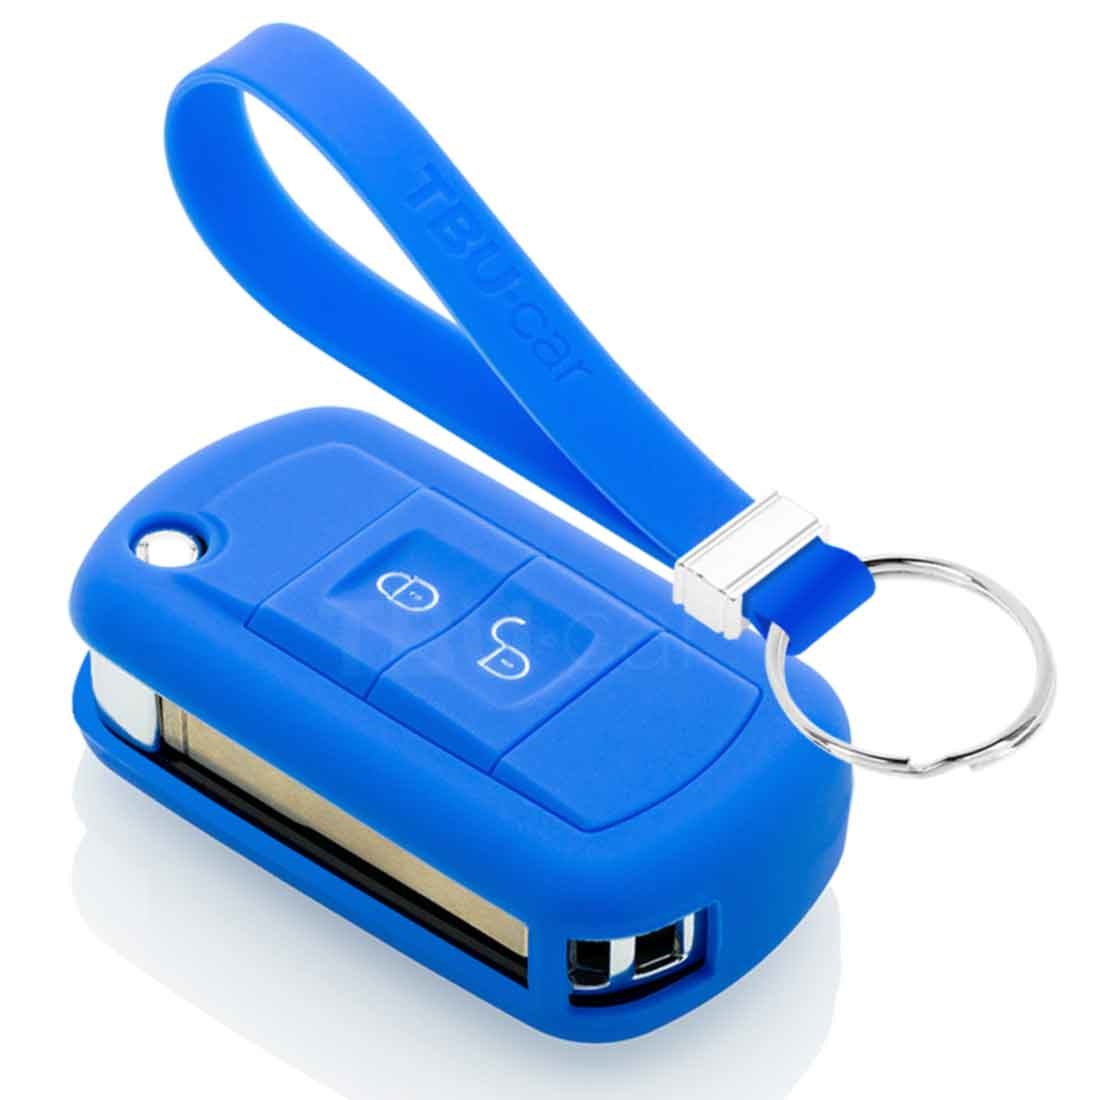 TBU car TBU car Car key cover compatible with Land Rover - Silicone Protective Remote Key Shell - FOB Case Cover - Blue